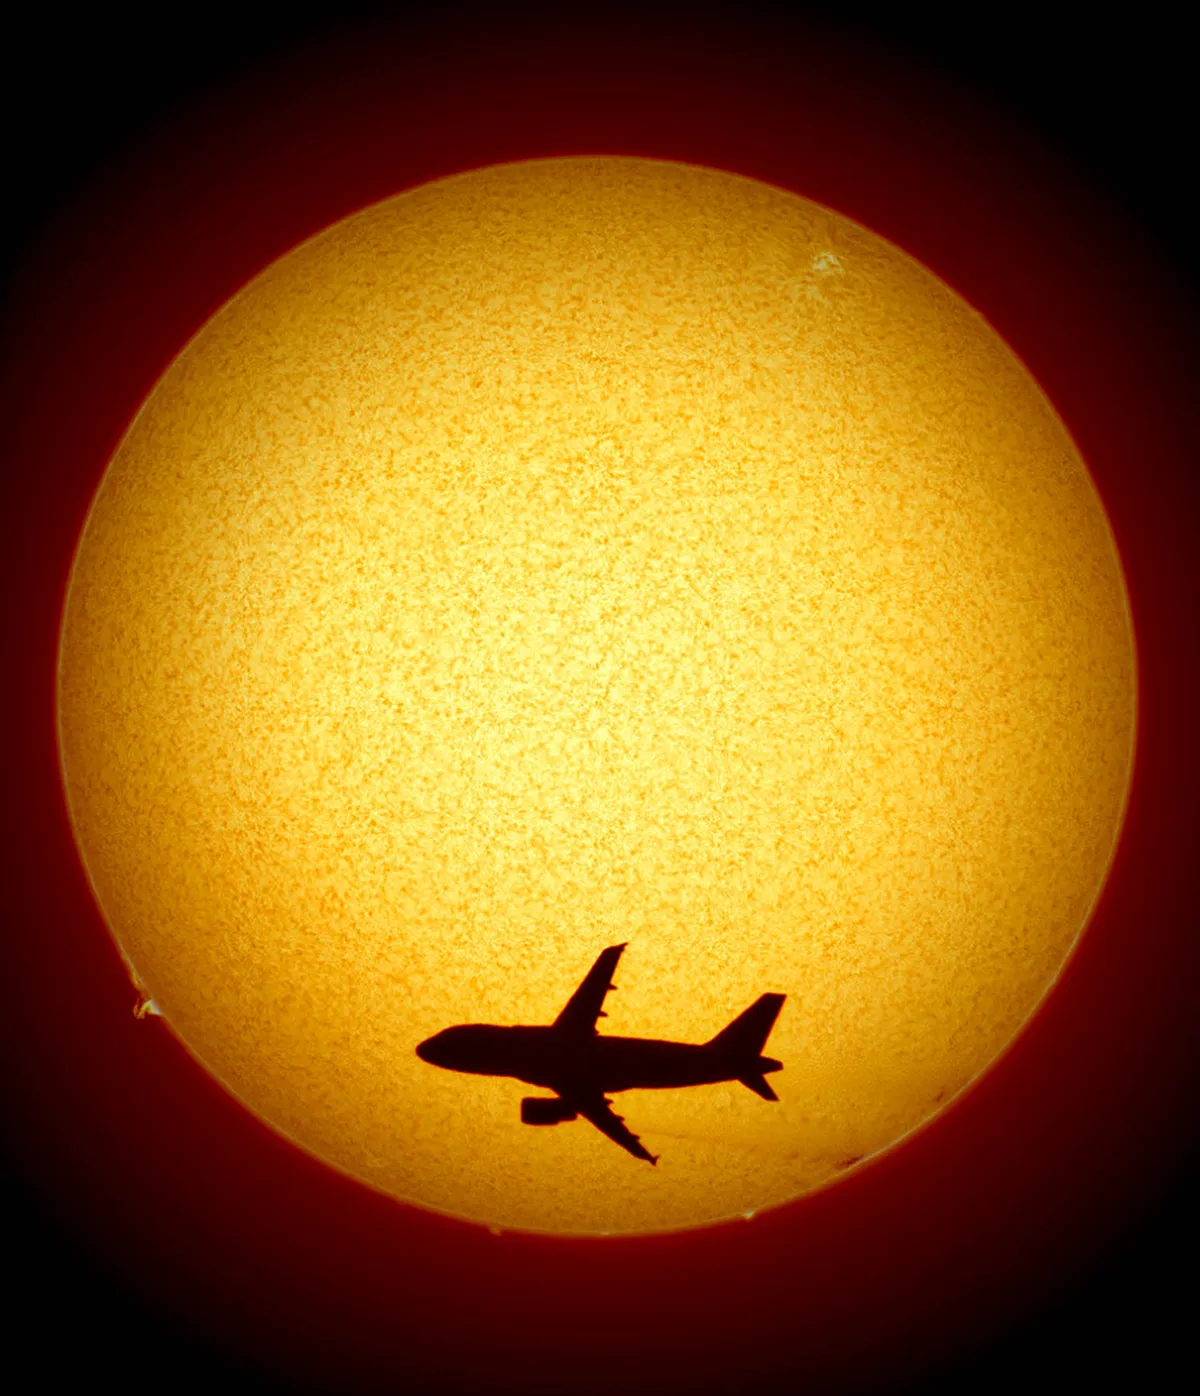 Photobombed by a plane: Sol by David Pickles, Rushden, UK. Equipment: Altair GPCAM 290M, 0.5x focal reducer, Lunt LS50Tha 600B PT solar scope.